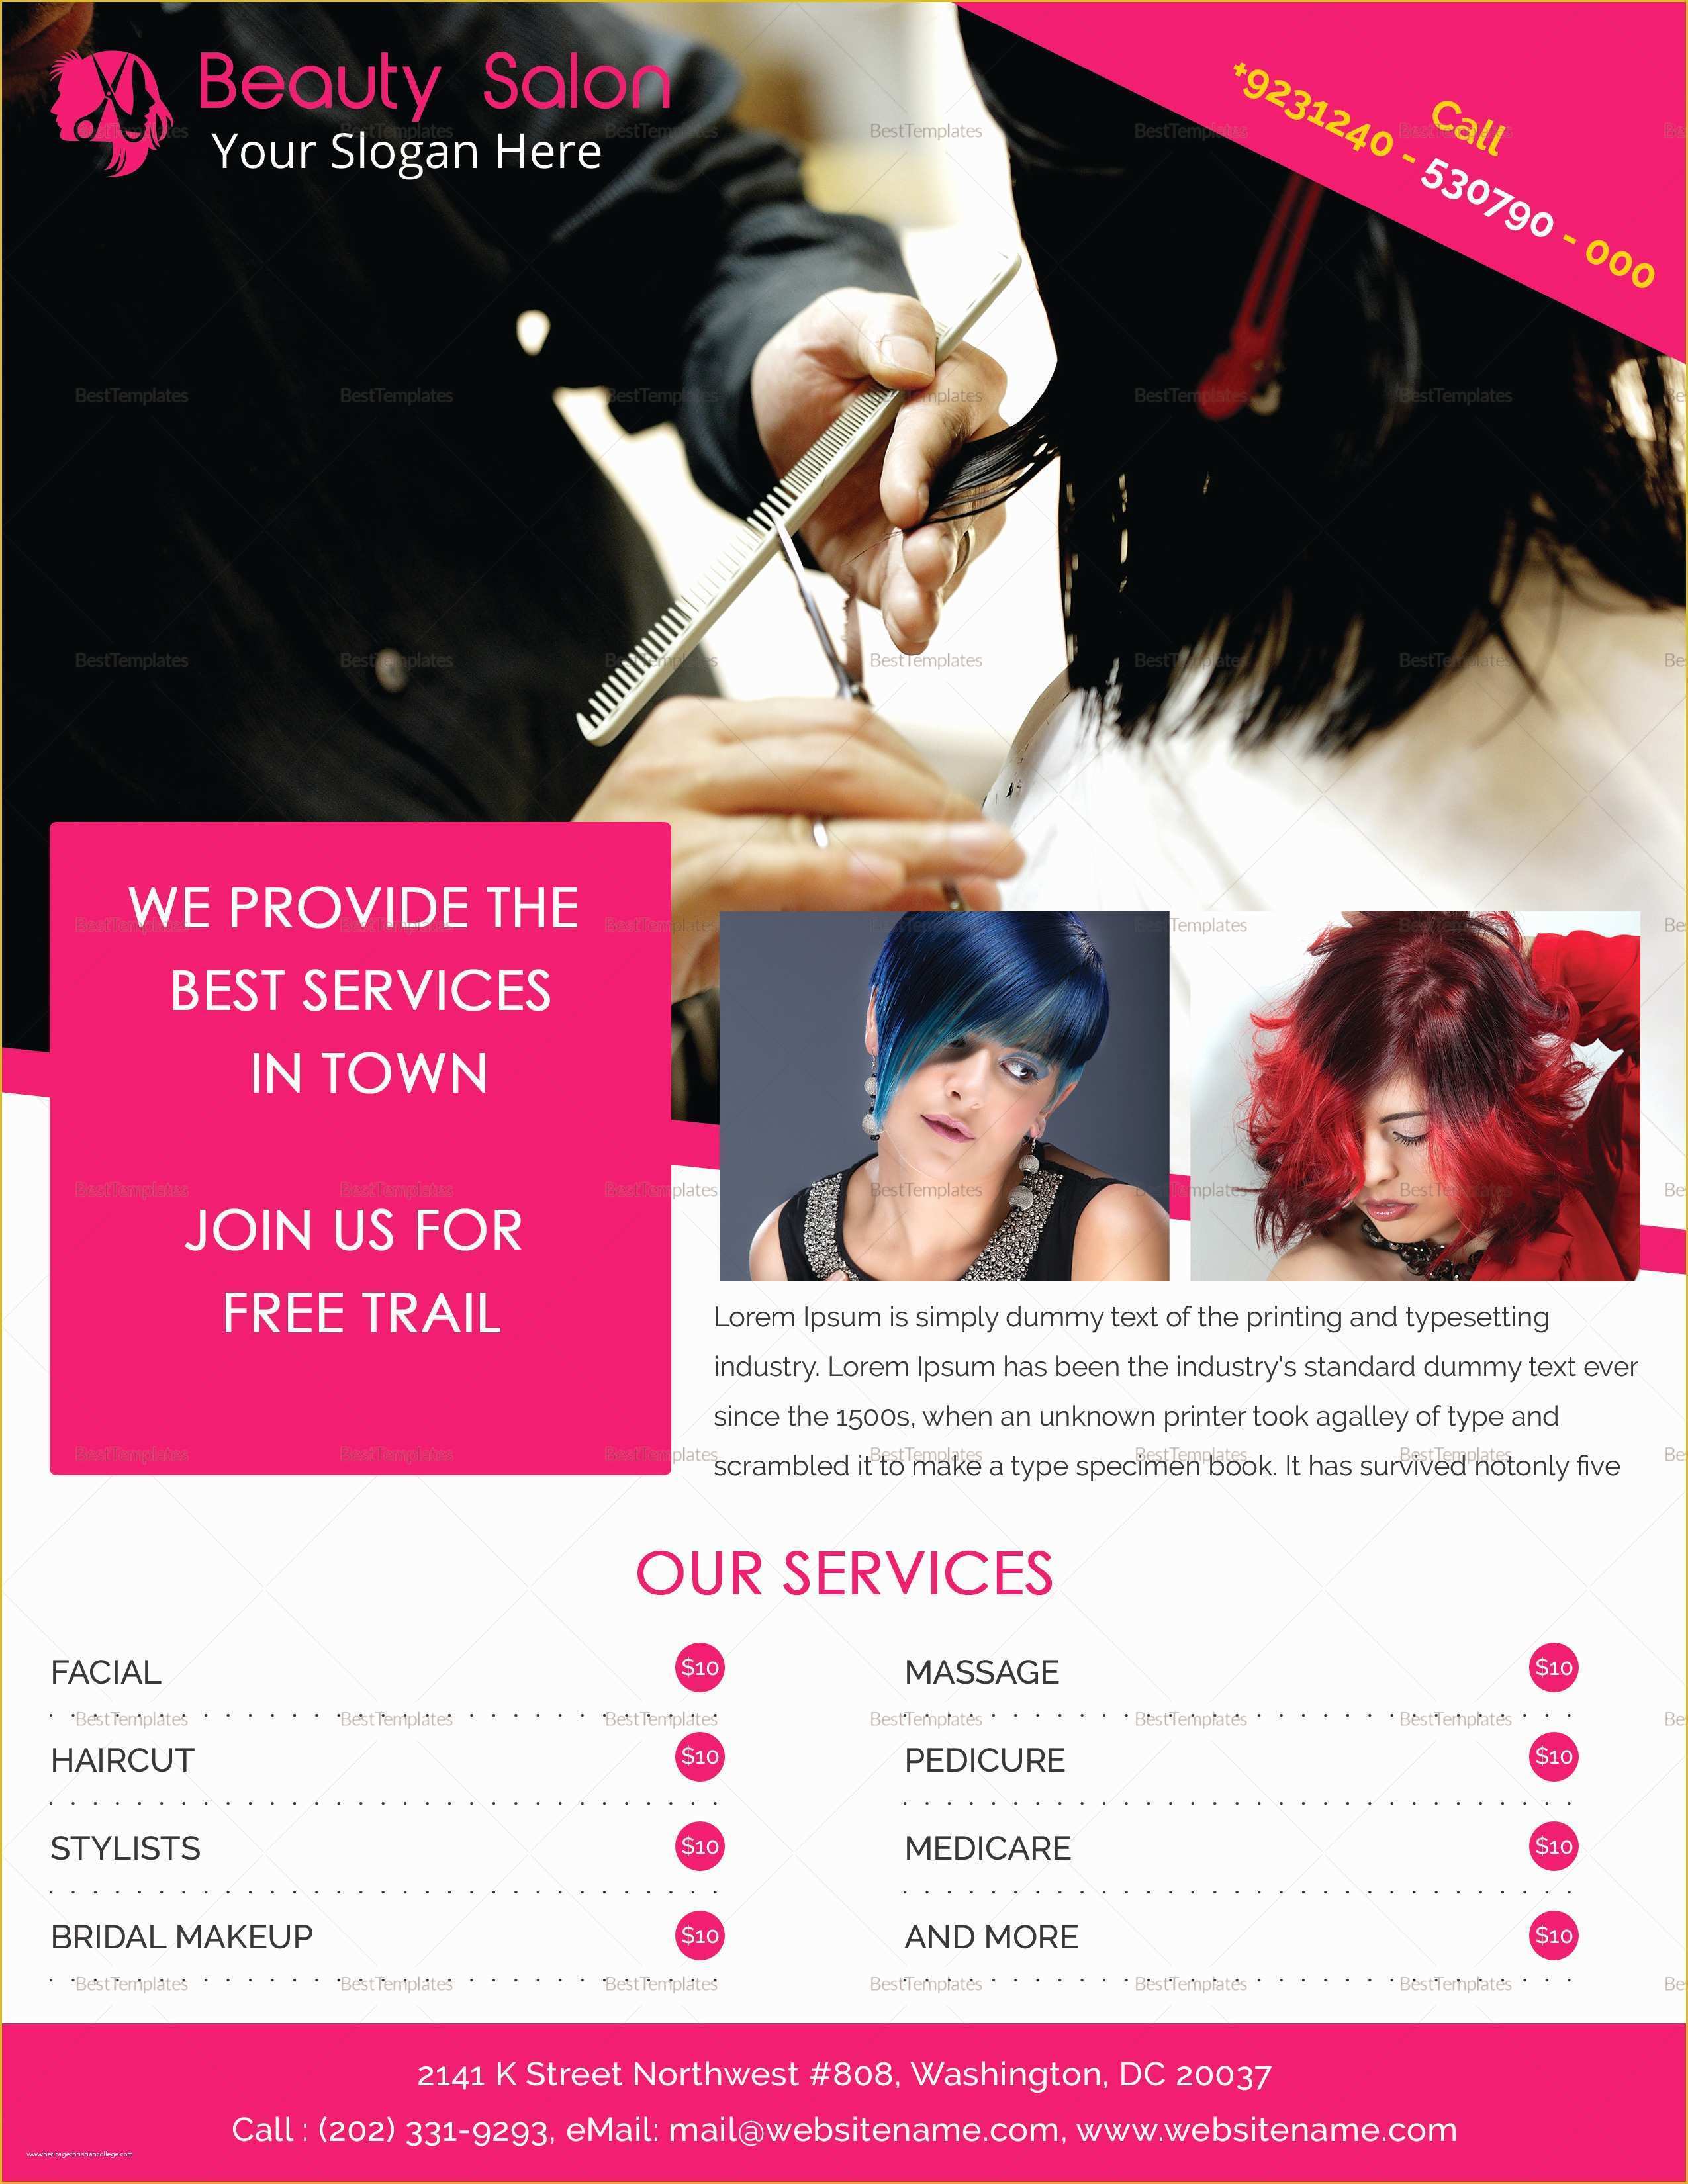 Beauty Salon Flyer Templates Free Download Of Beauty Salon Flyer Design Template In Psd Word Publisher